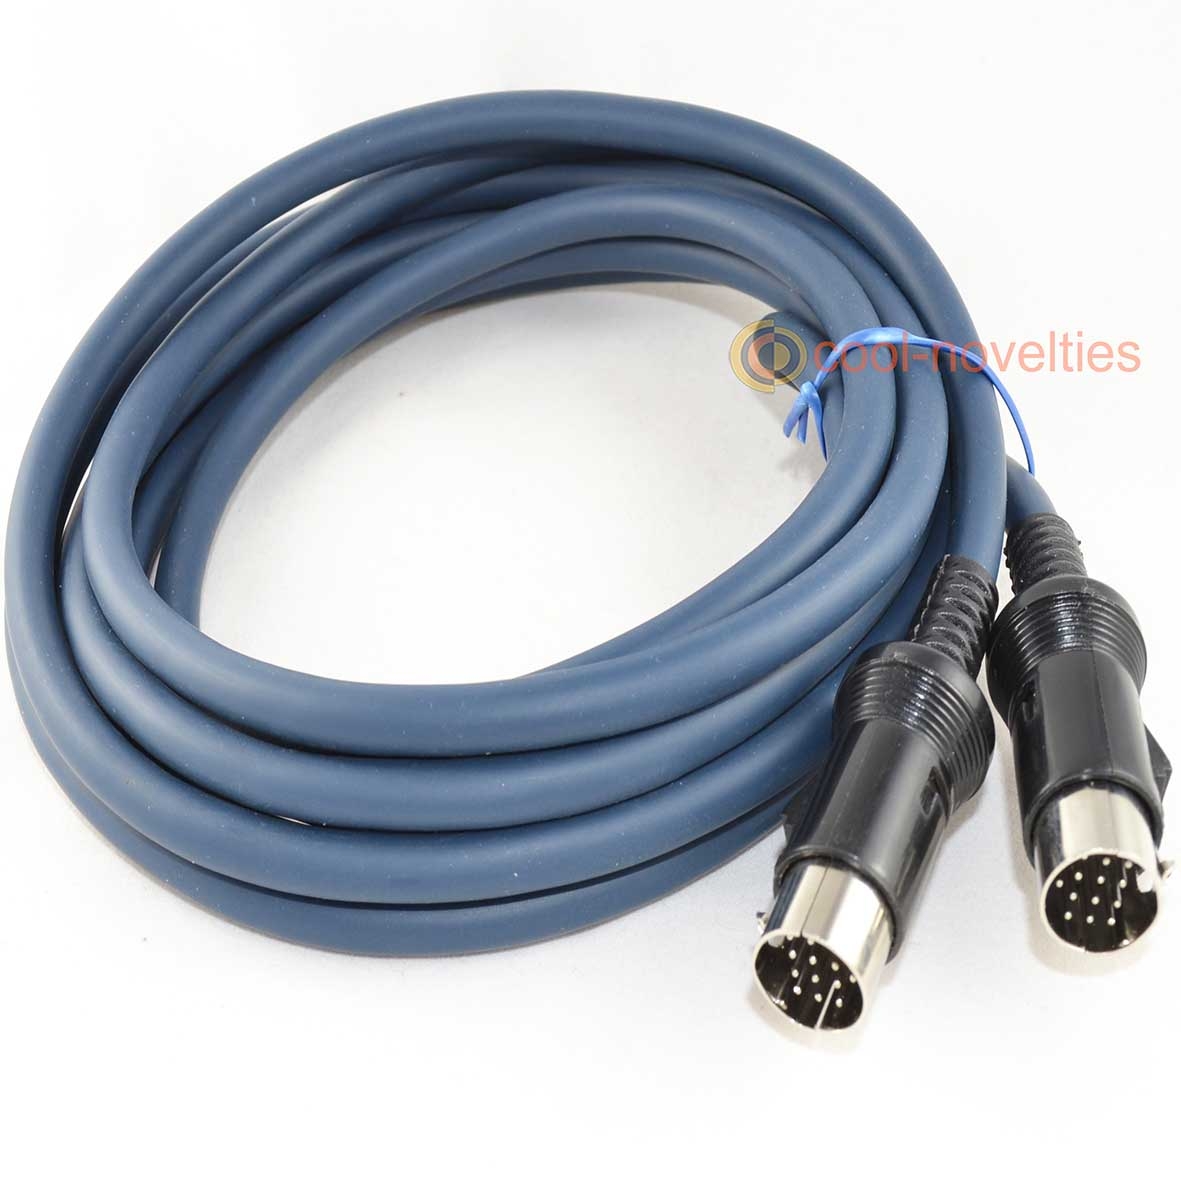 Beeldhouwer Touhou Vlieger 13 Pin DIN Male Plug to Male Plug Midi Cable (Roland GKC equivalent)